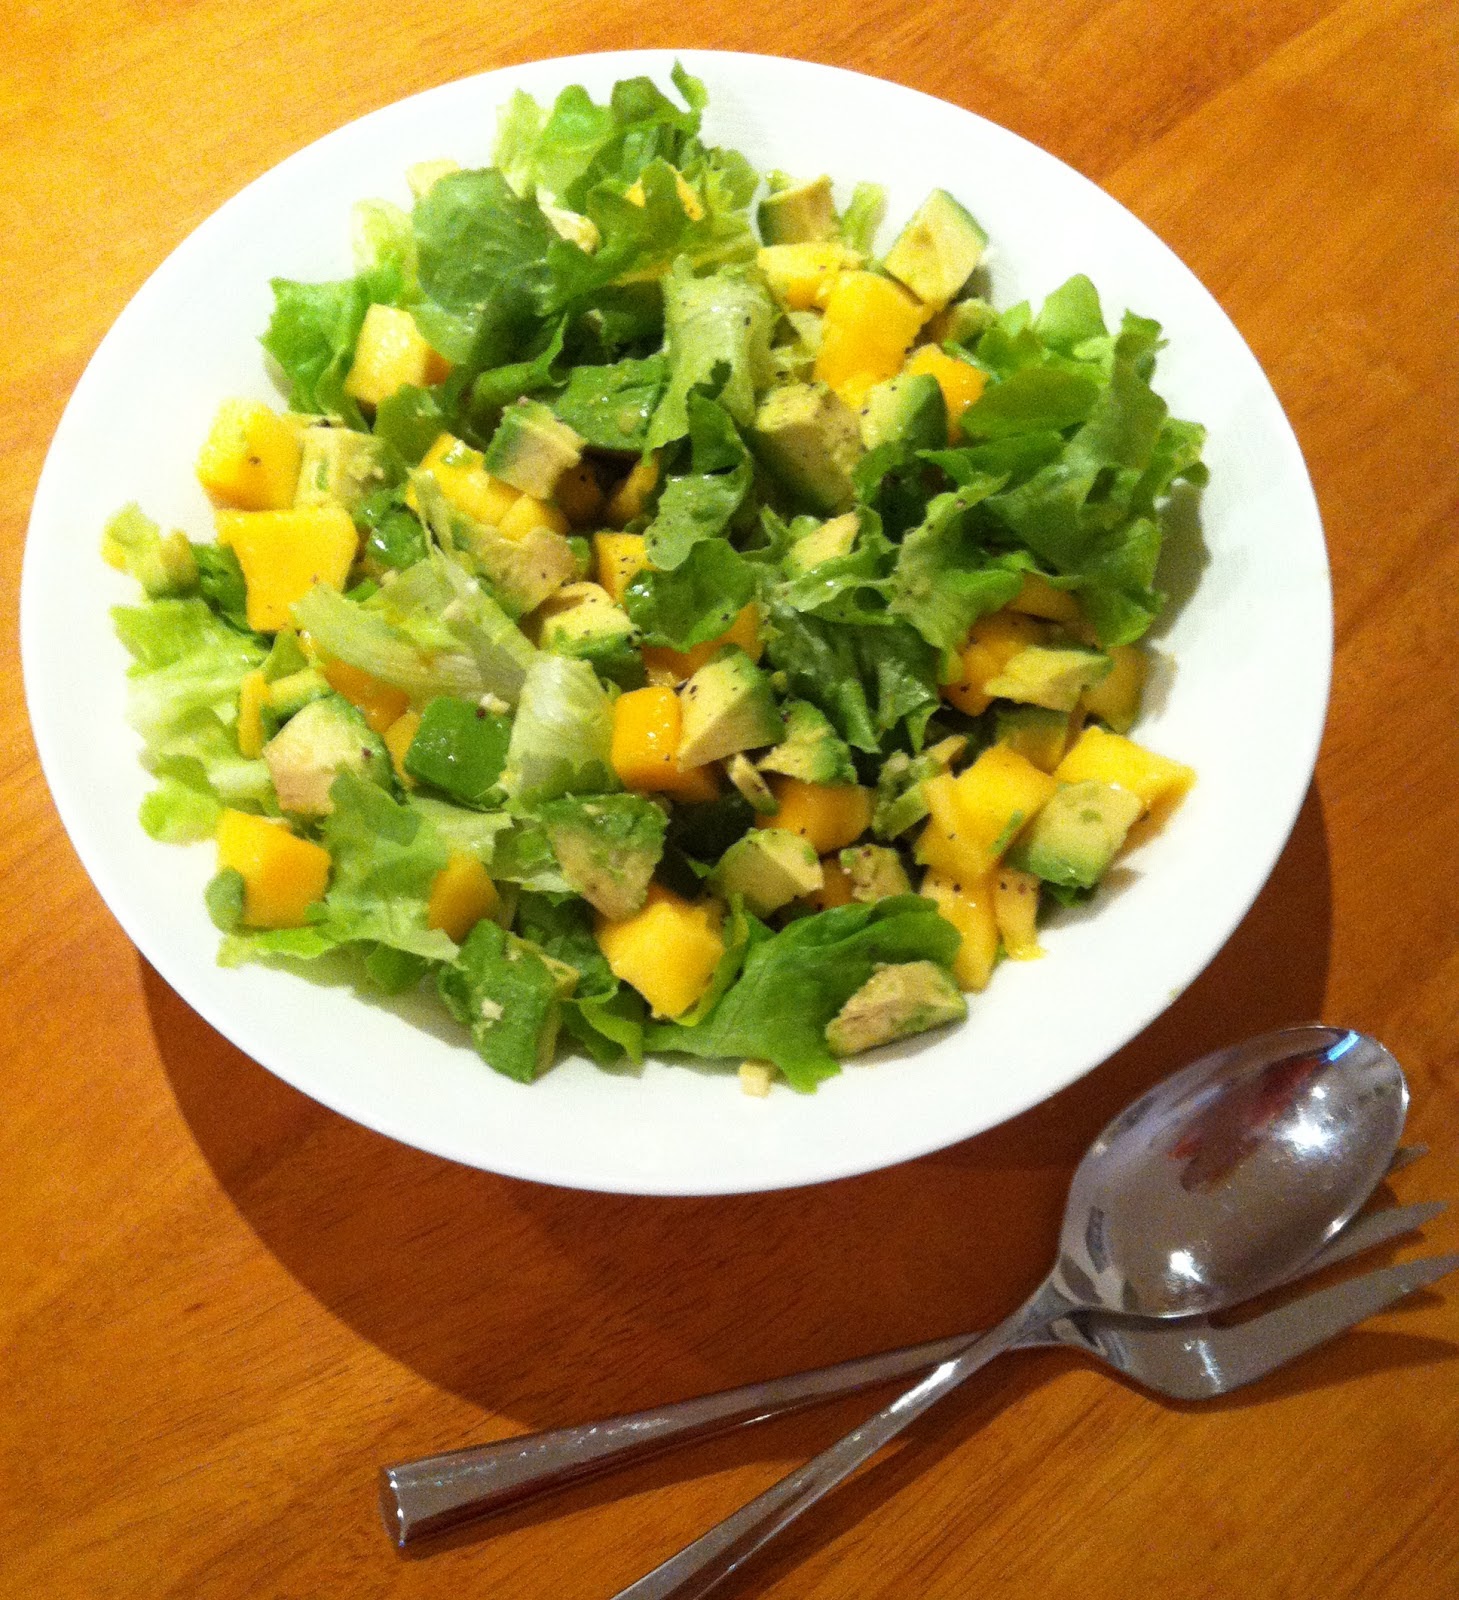 "Delicious and Refreshing: Mango and Avocado Salad Recipe Bursting with Flavors!"